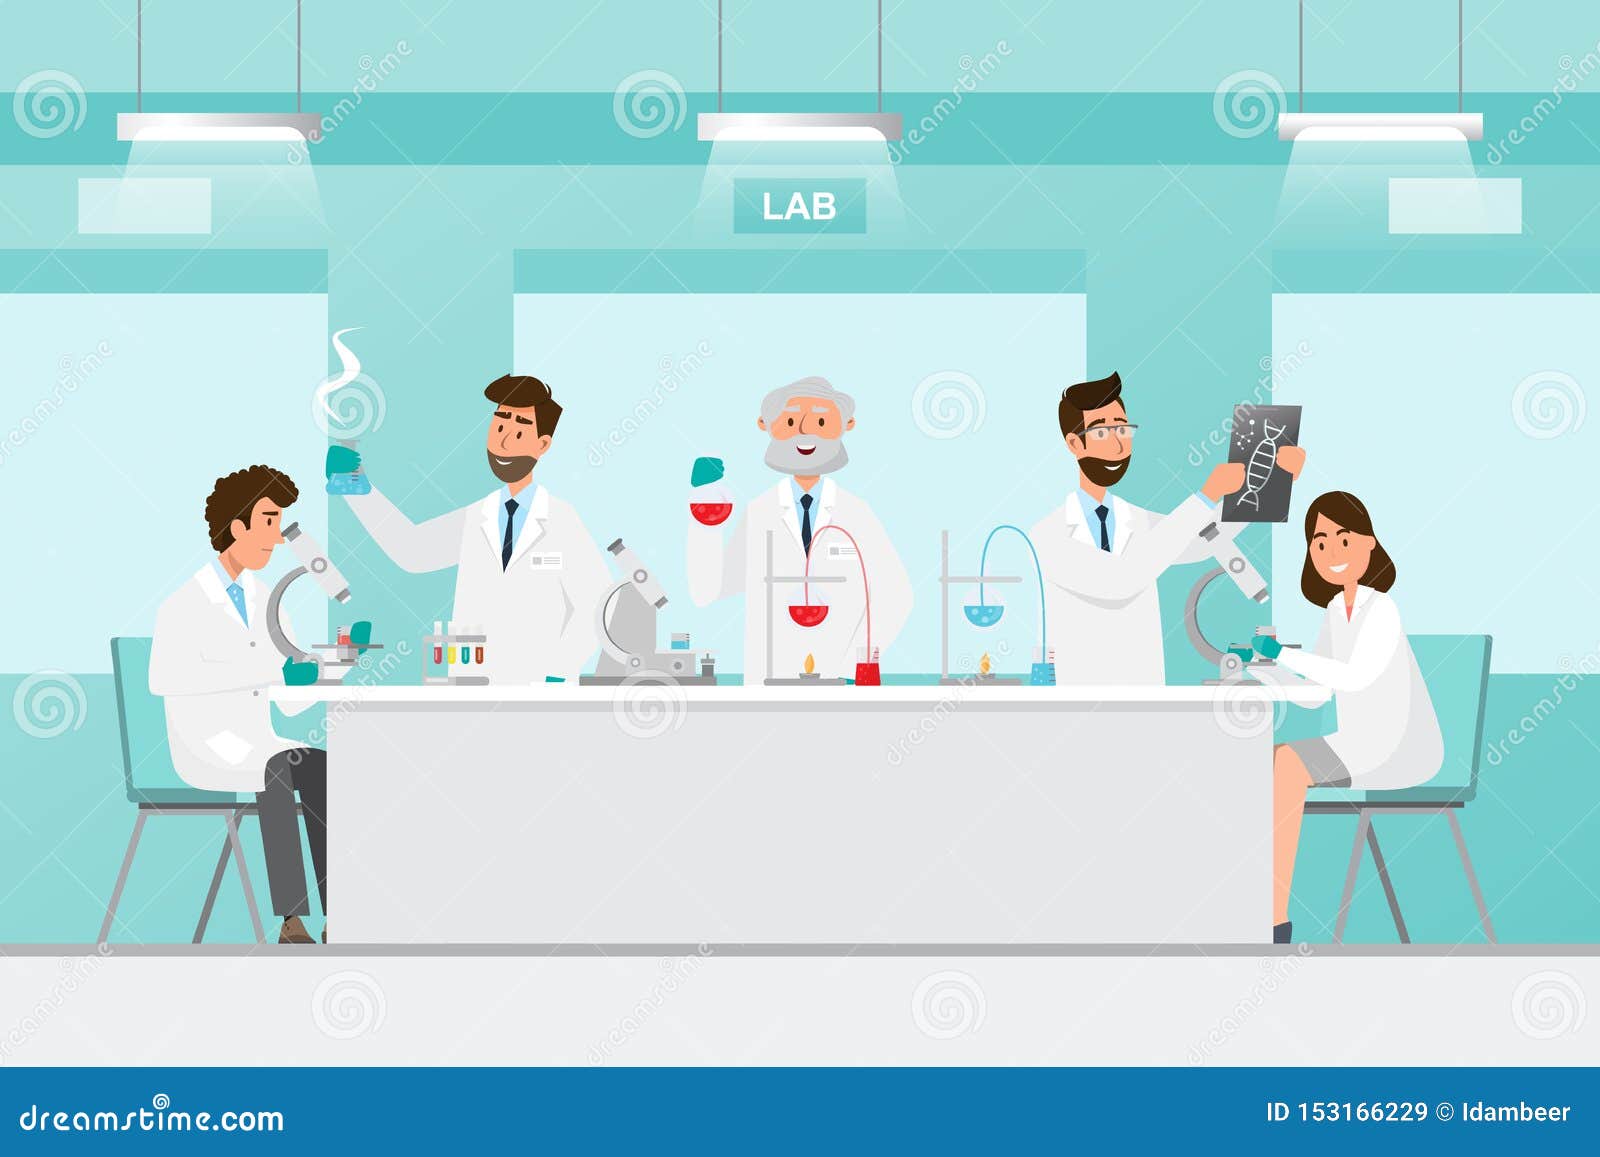 Medical Concept. Scientists Man and Woman Research in a Laboratory Lab ...